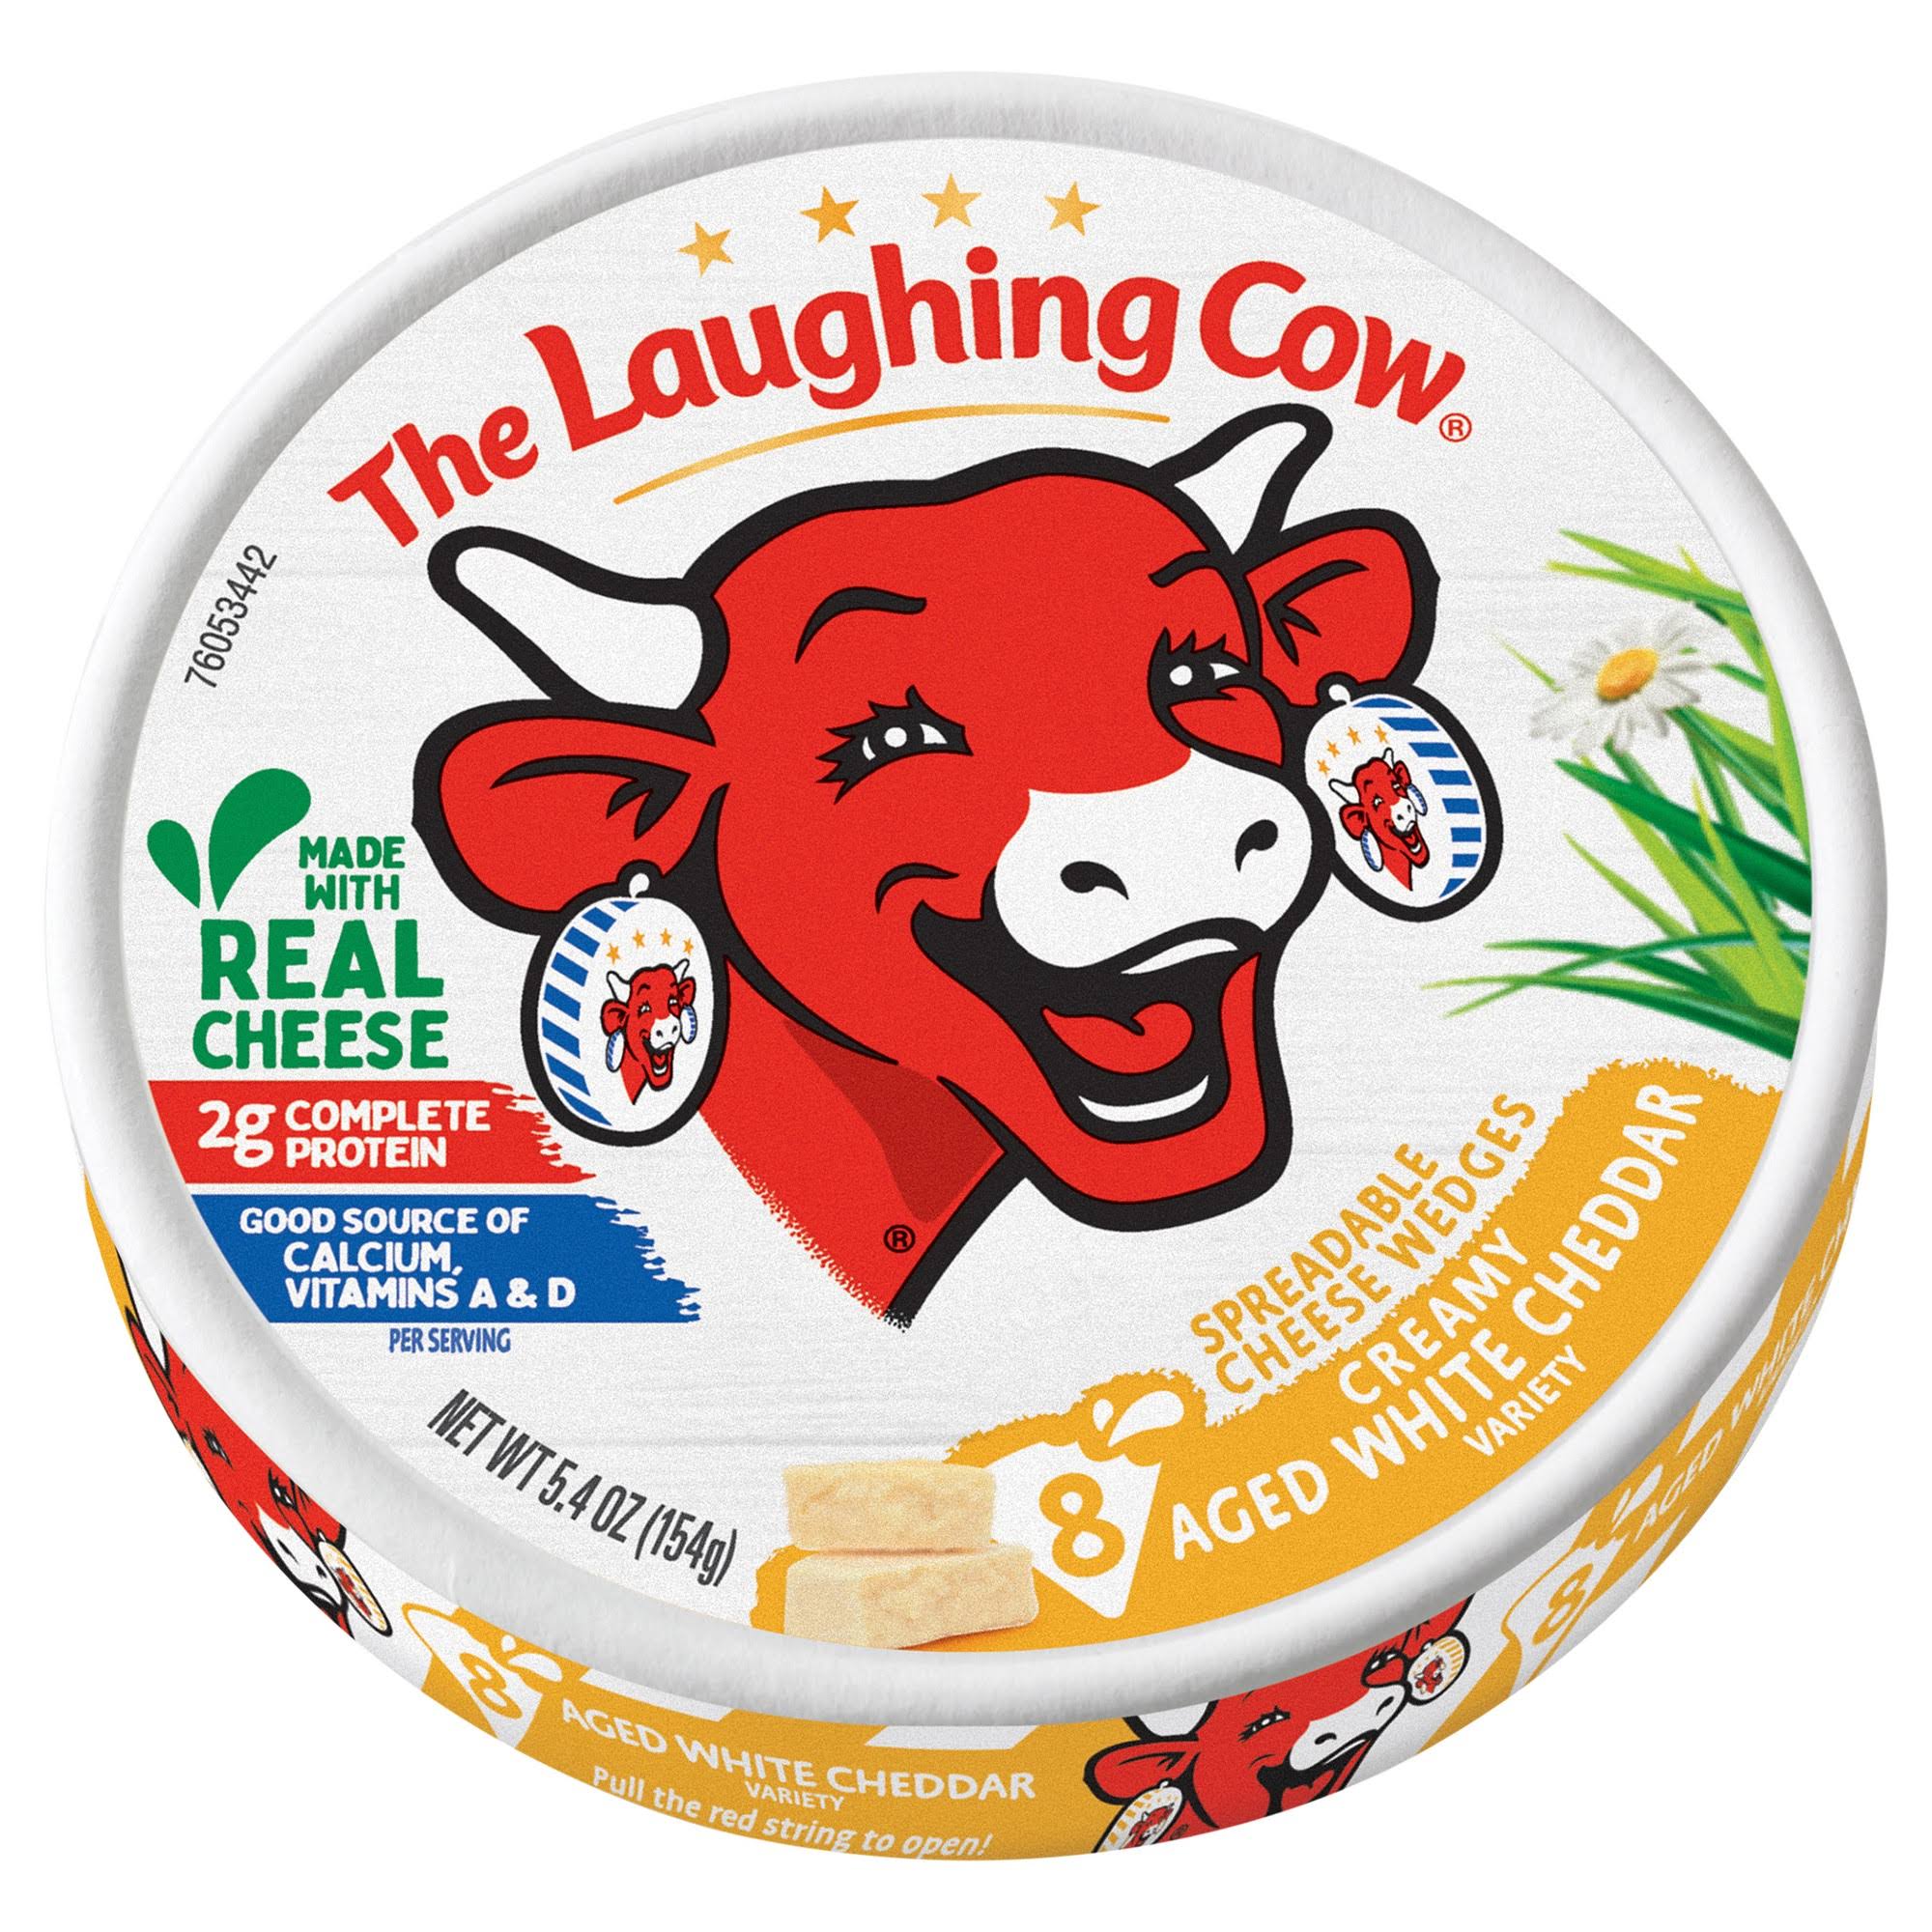 The Laughing Cow White Cheddar Spreadable Cheese Wedge, 5.4 oz Box